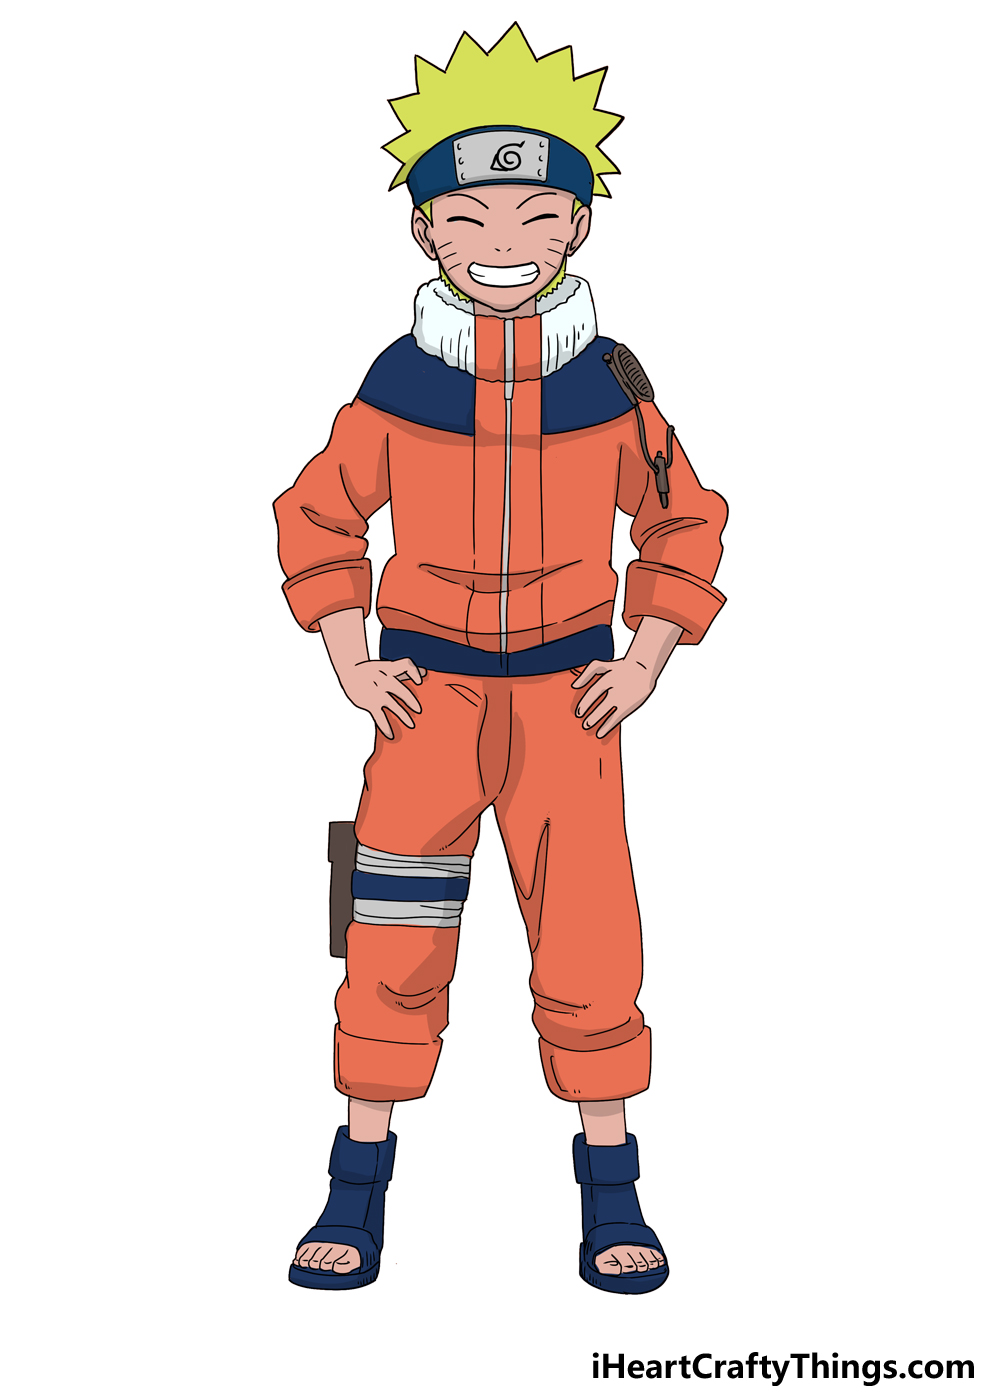 Easy to draw  how to draw kid naruto step-by-step using just a